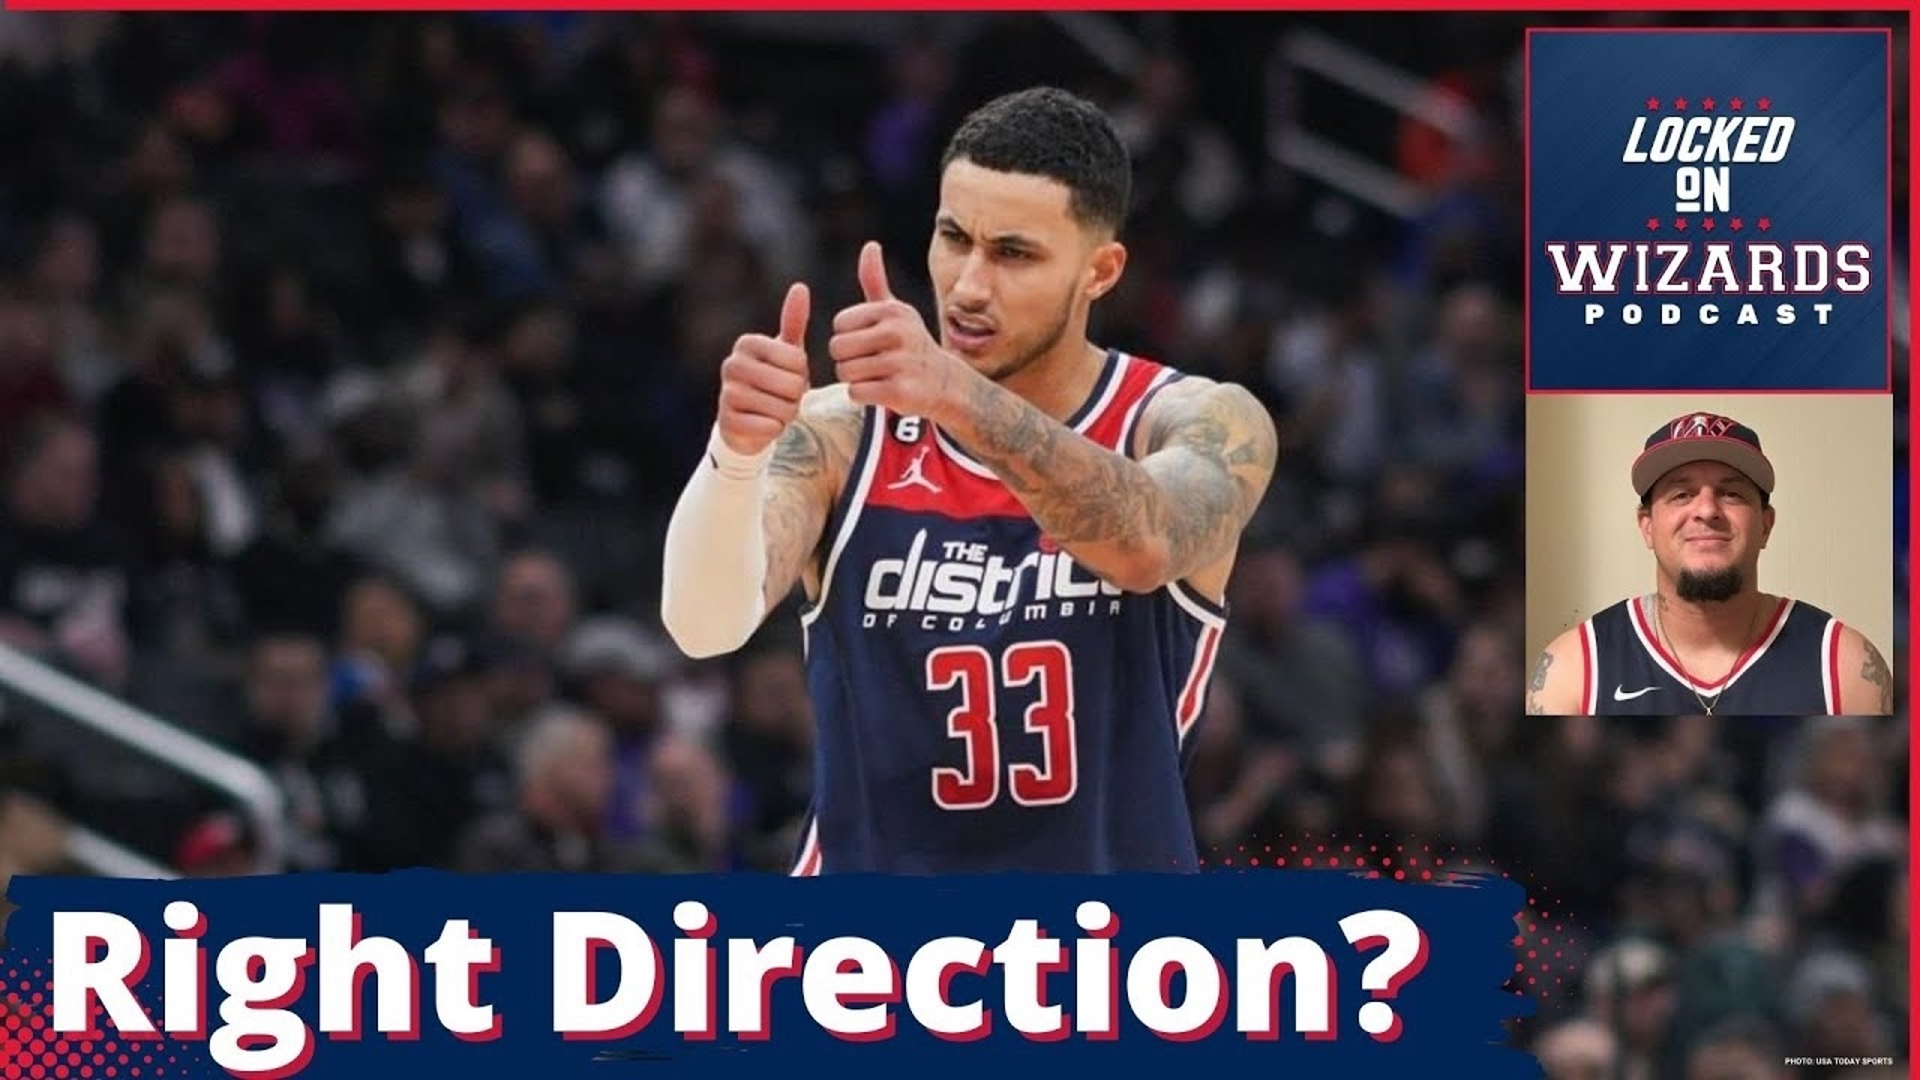 Special Guest Craig Hoffman joins Brandon to discuss the state of the Wizards franchise by answering questions about the direction of the team.